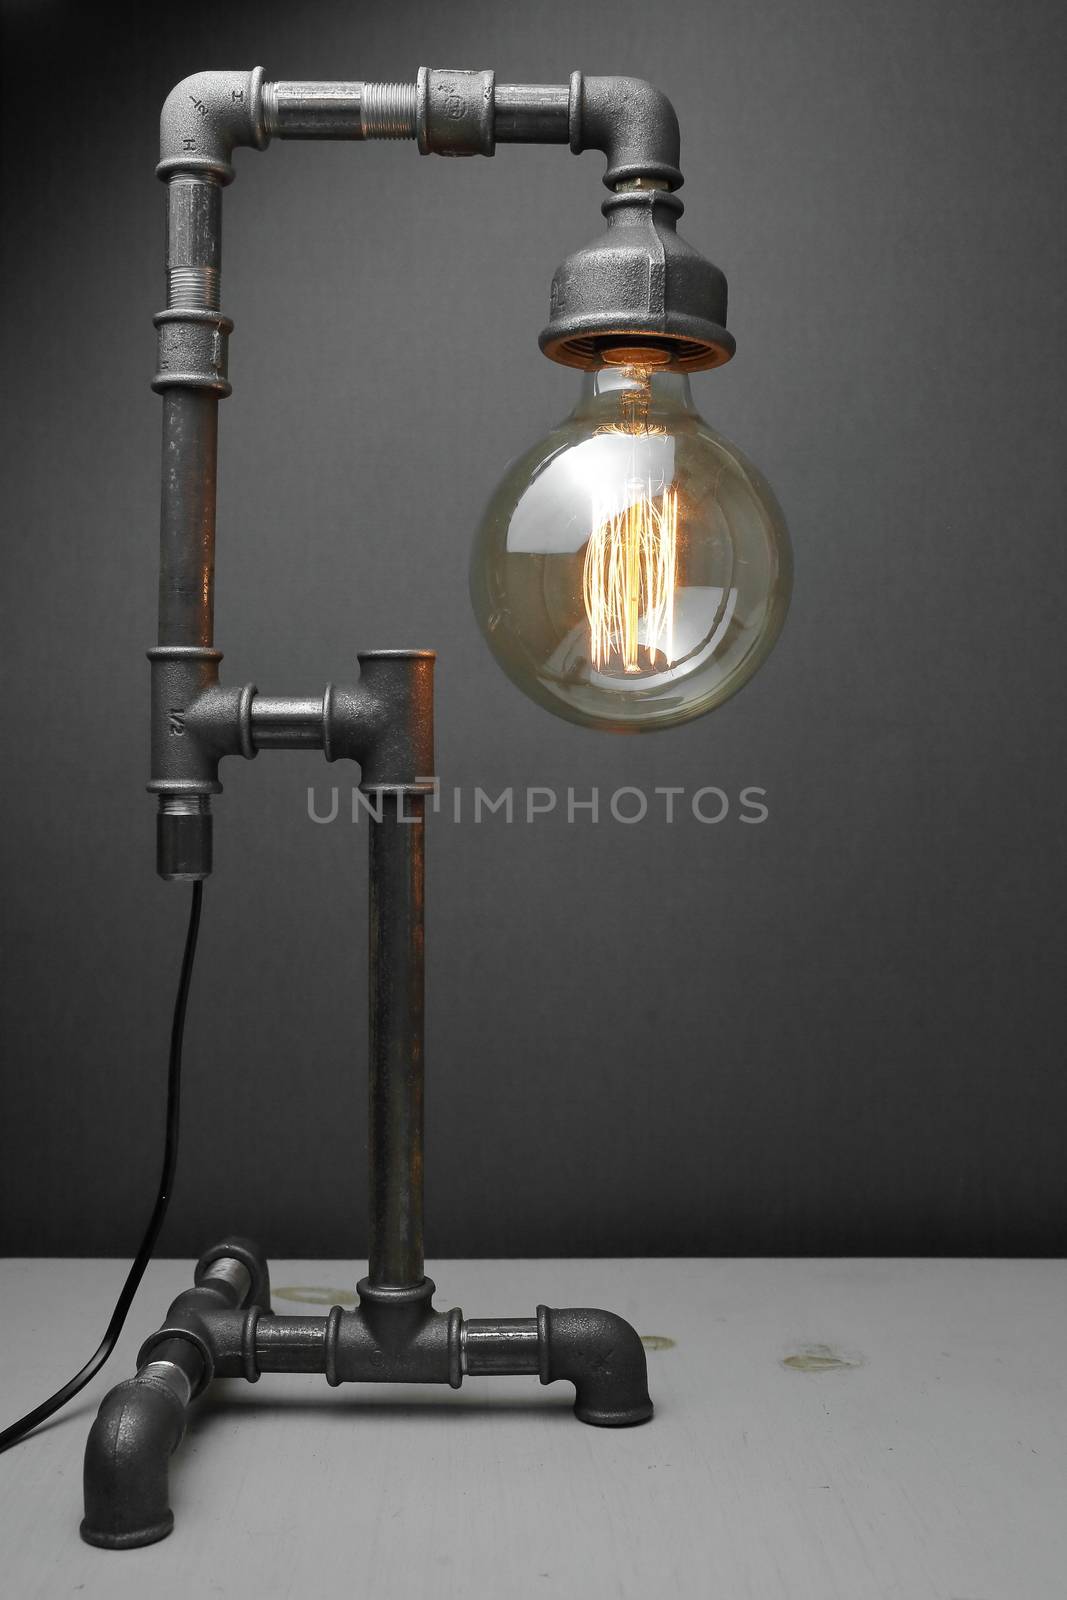 Retro lamp made of metal water pipes with an Edison lamp on a gray background. The concept is a good idea. by selinsmo